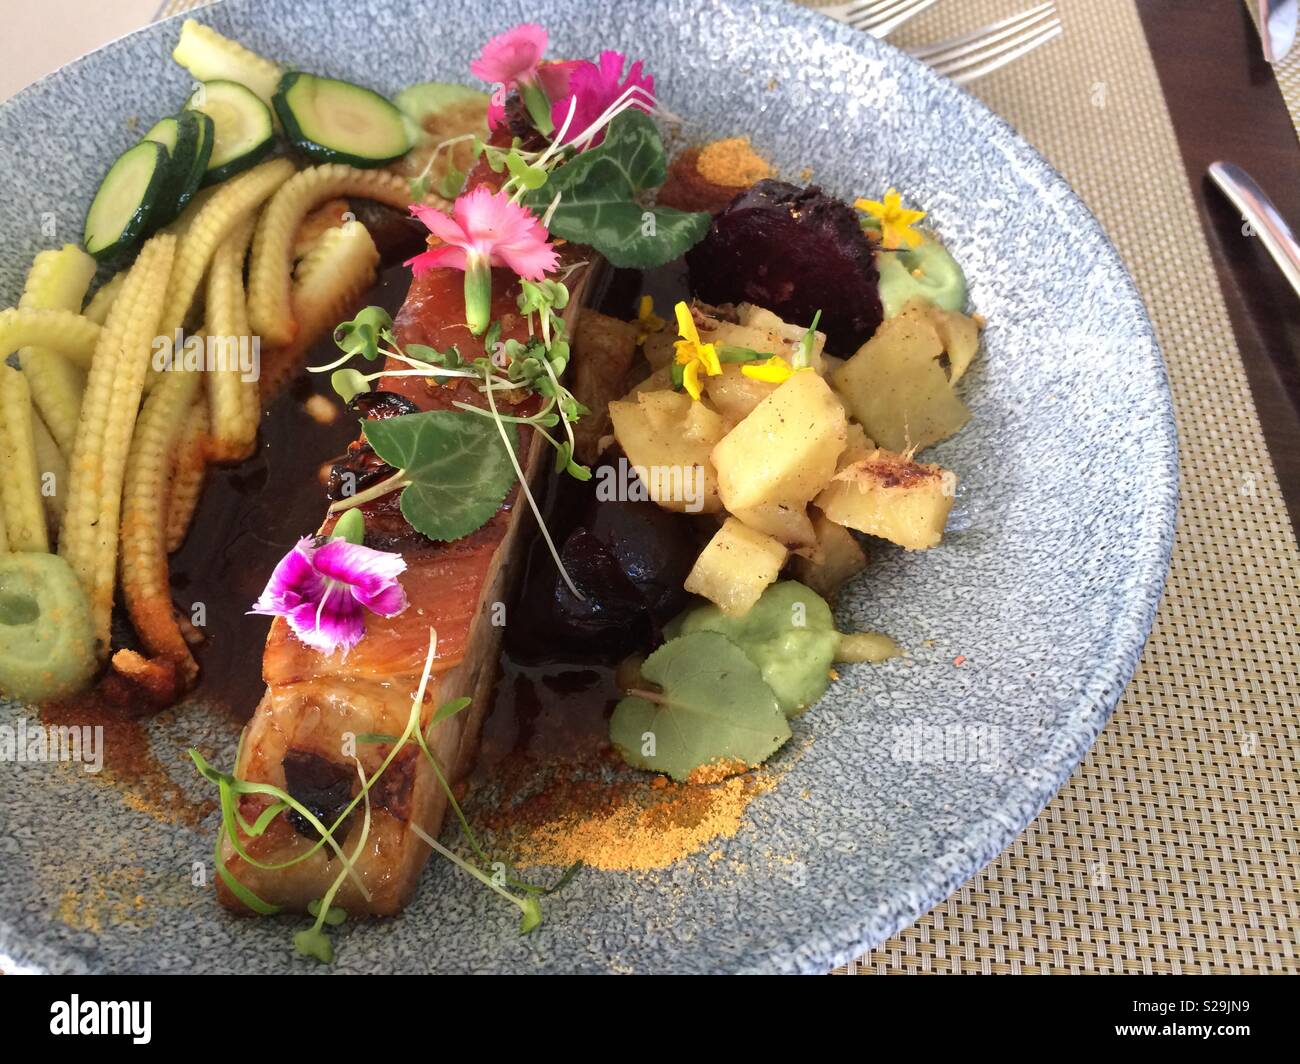 Pork belly grilled to perfection and served with an assortment of colorful vegetables and edible flowers at an upmarket restaurant at lunch Stock Photo